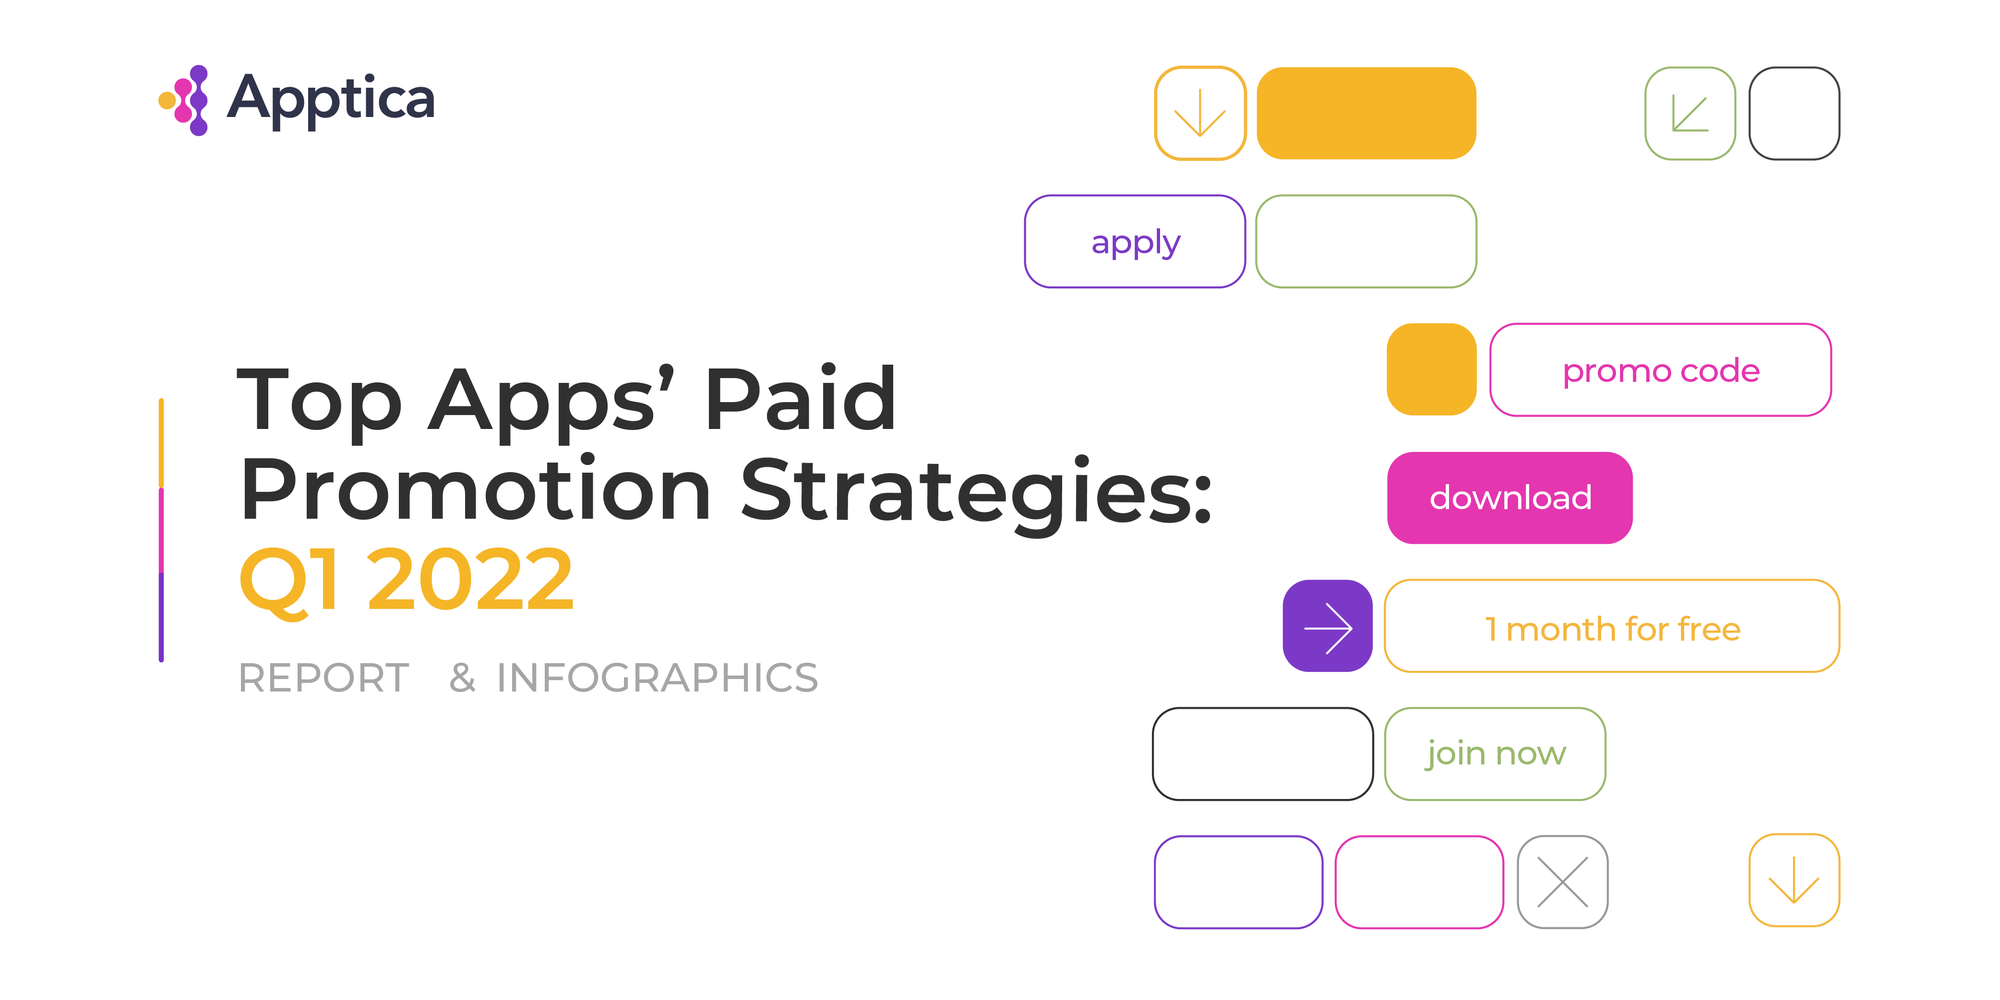 Top Apps’ Paid Promotion Strategies: Q1 2022